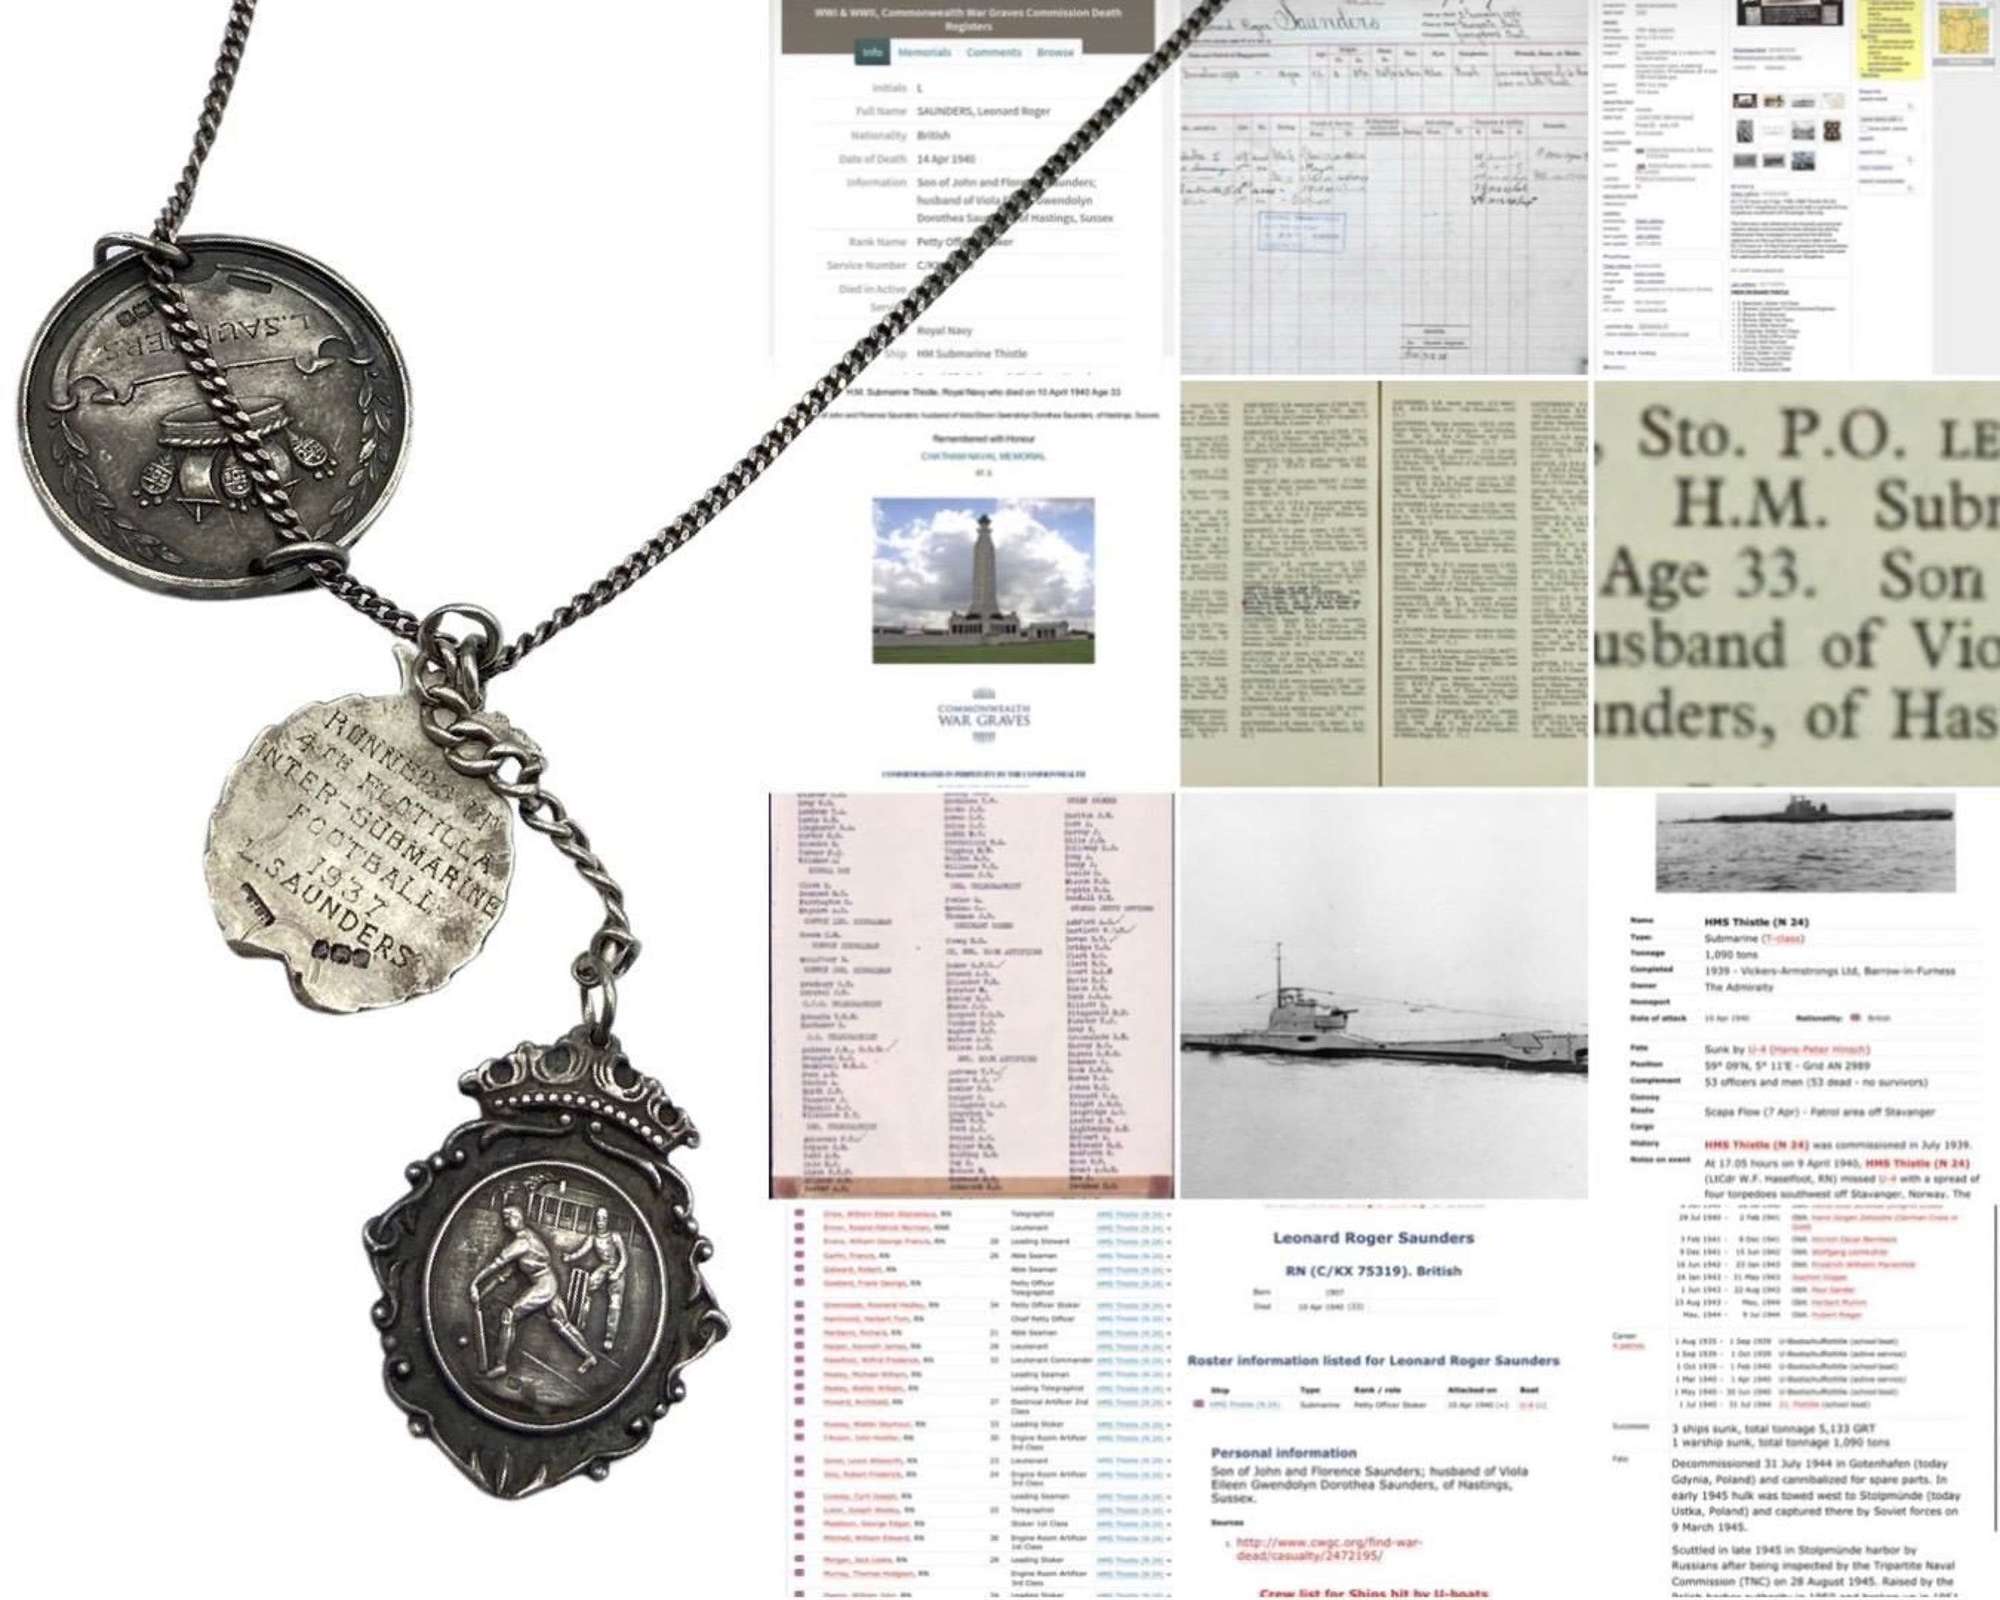 WW2 Submariners L R Saunders Hms Thistle Sunk By U-Boat Silver Medals